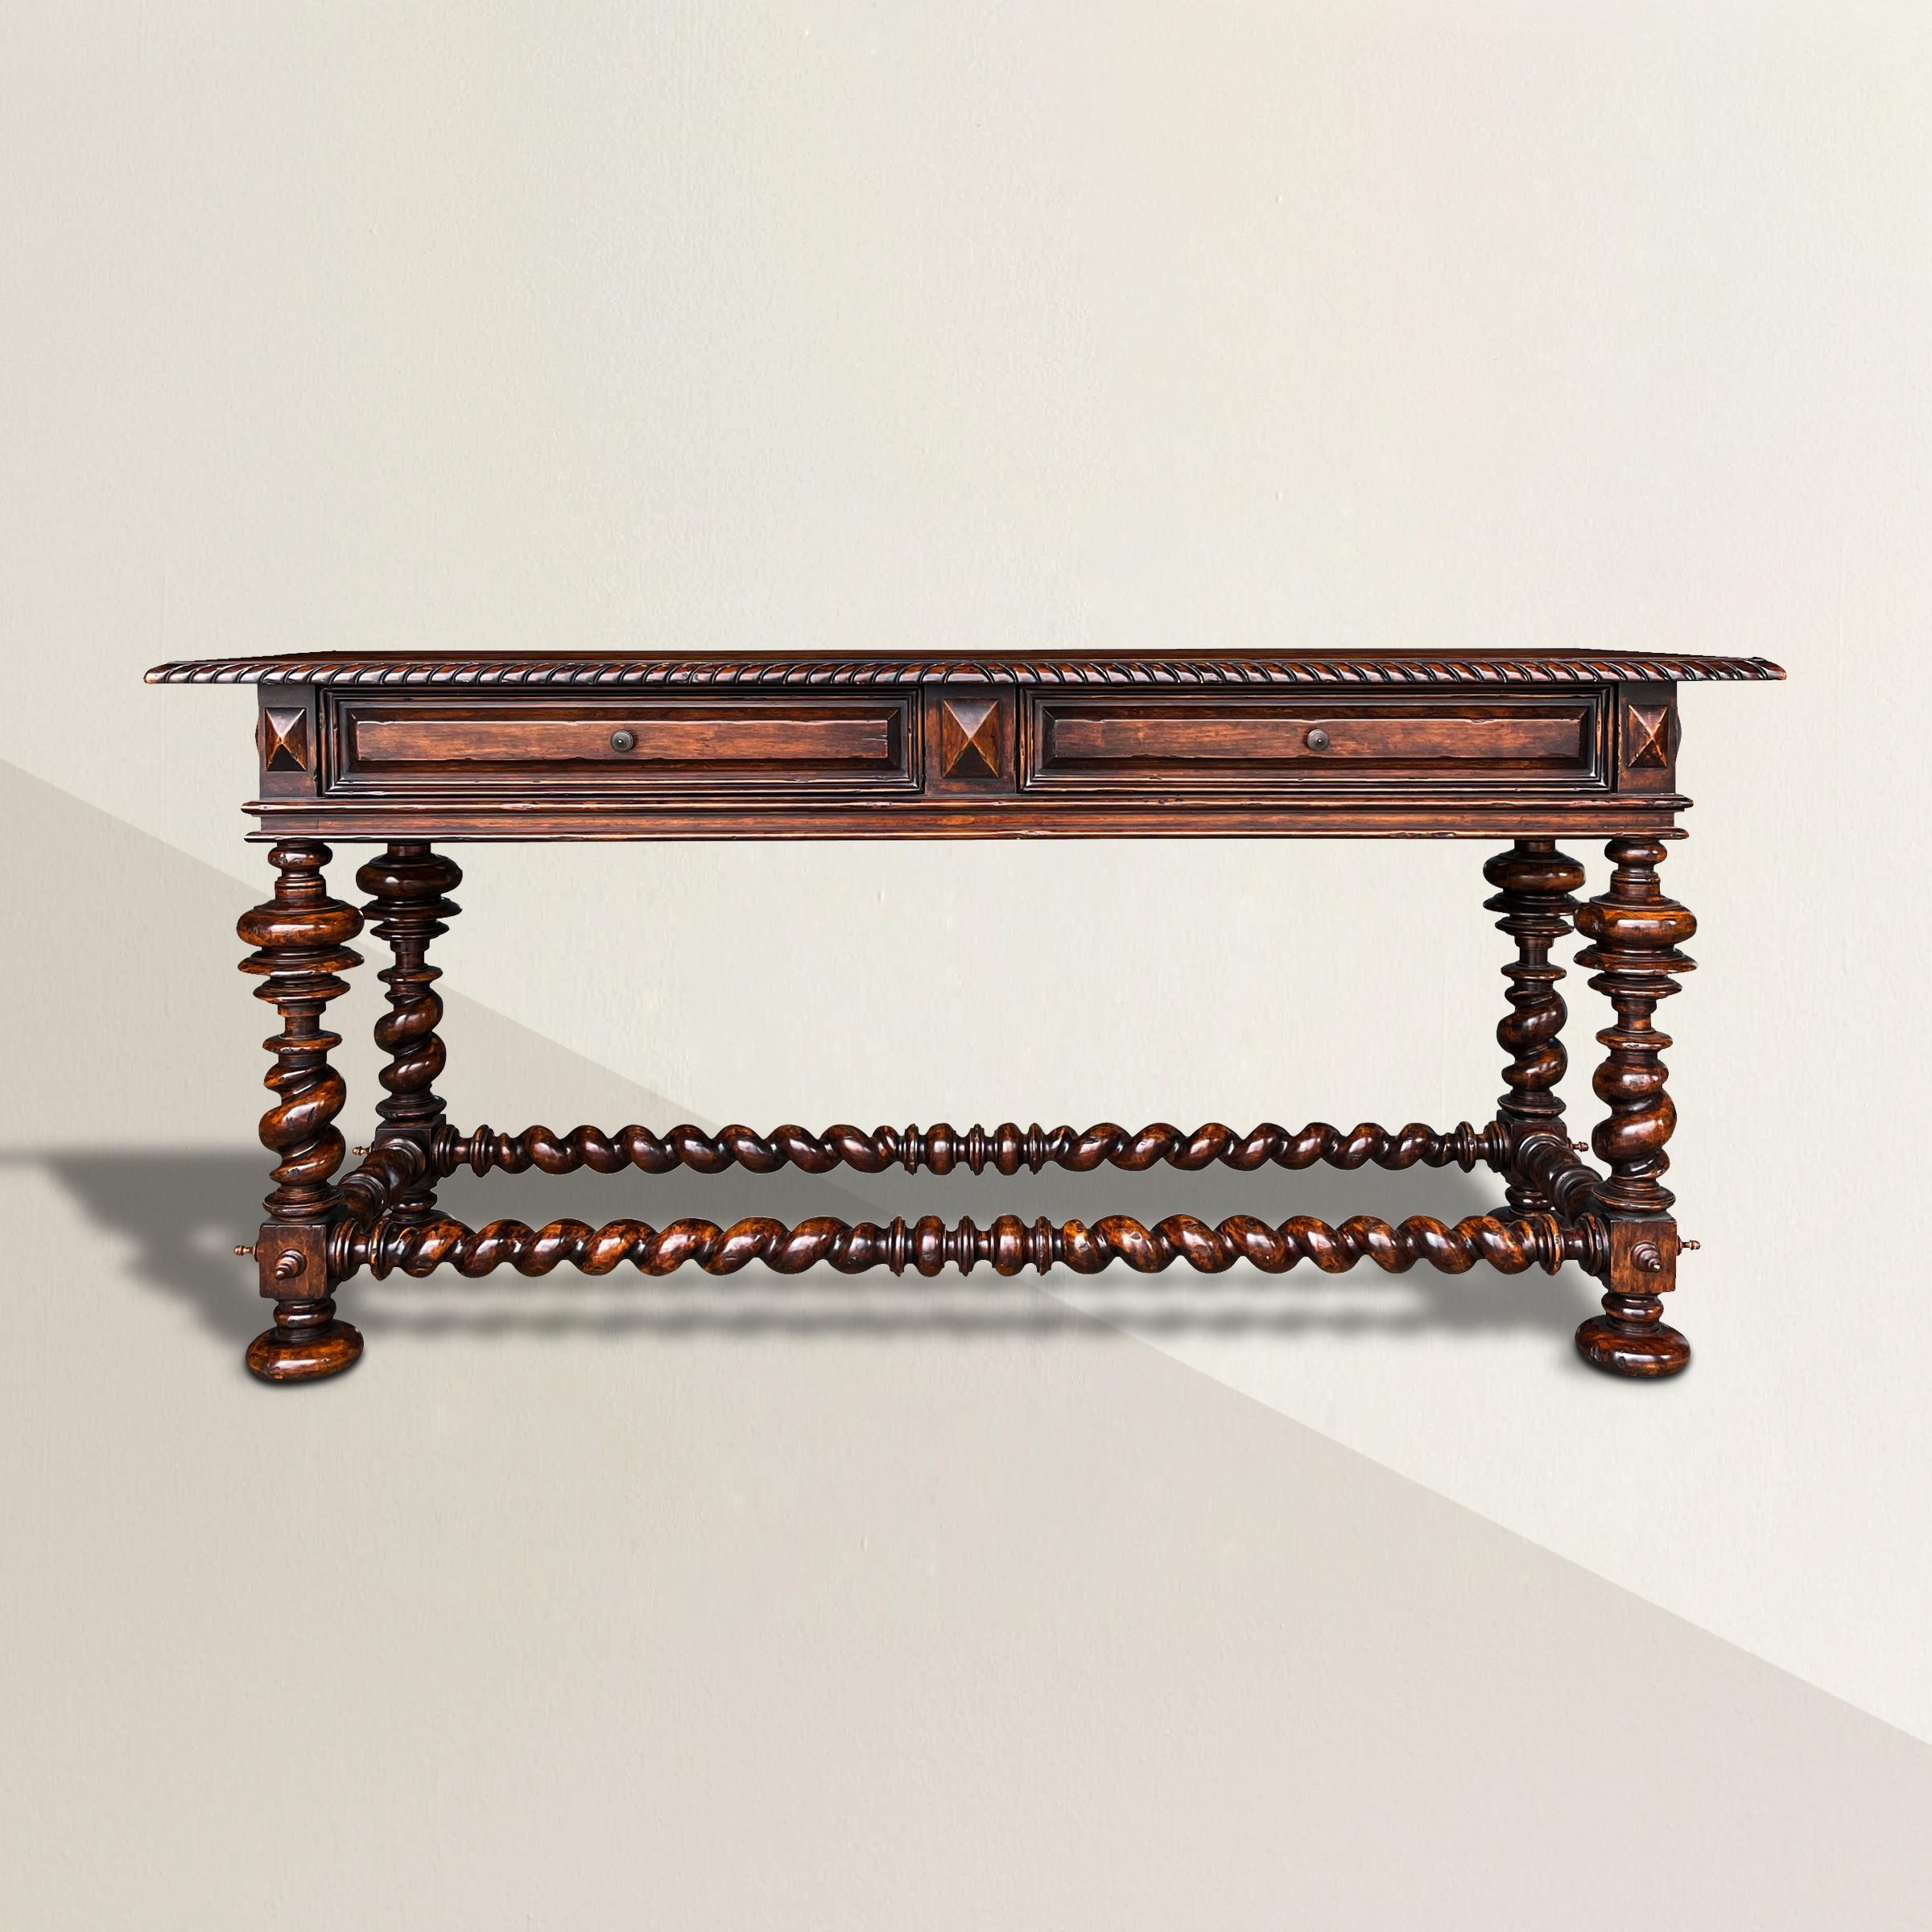 A bold and striking 20th century Portuguese-style console table with wonderfully elaborate turned legs with barley twist spandrels and large bun feet, and two drawers with bronze knobs. Perfect in your entry, behind a sofa, or under your television